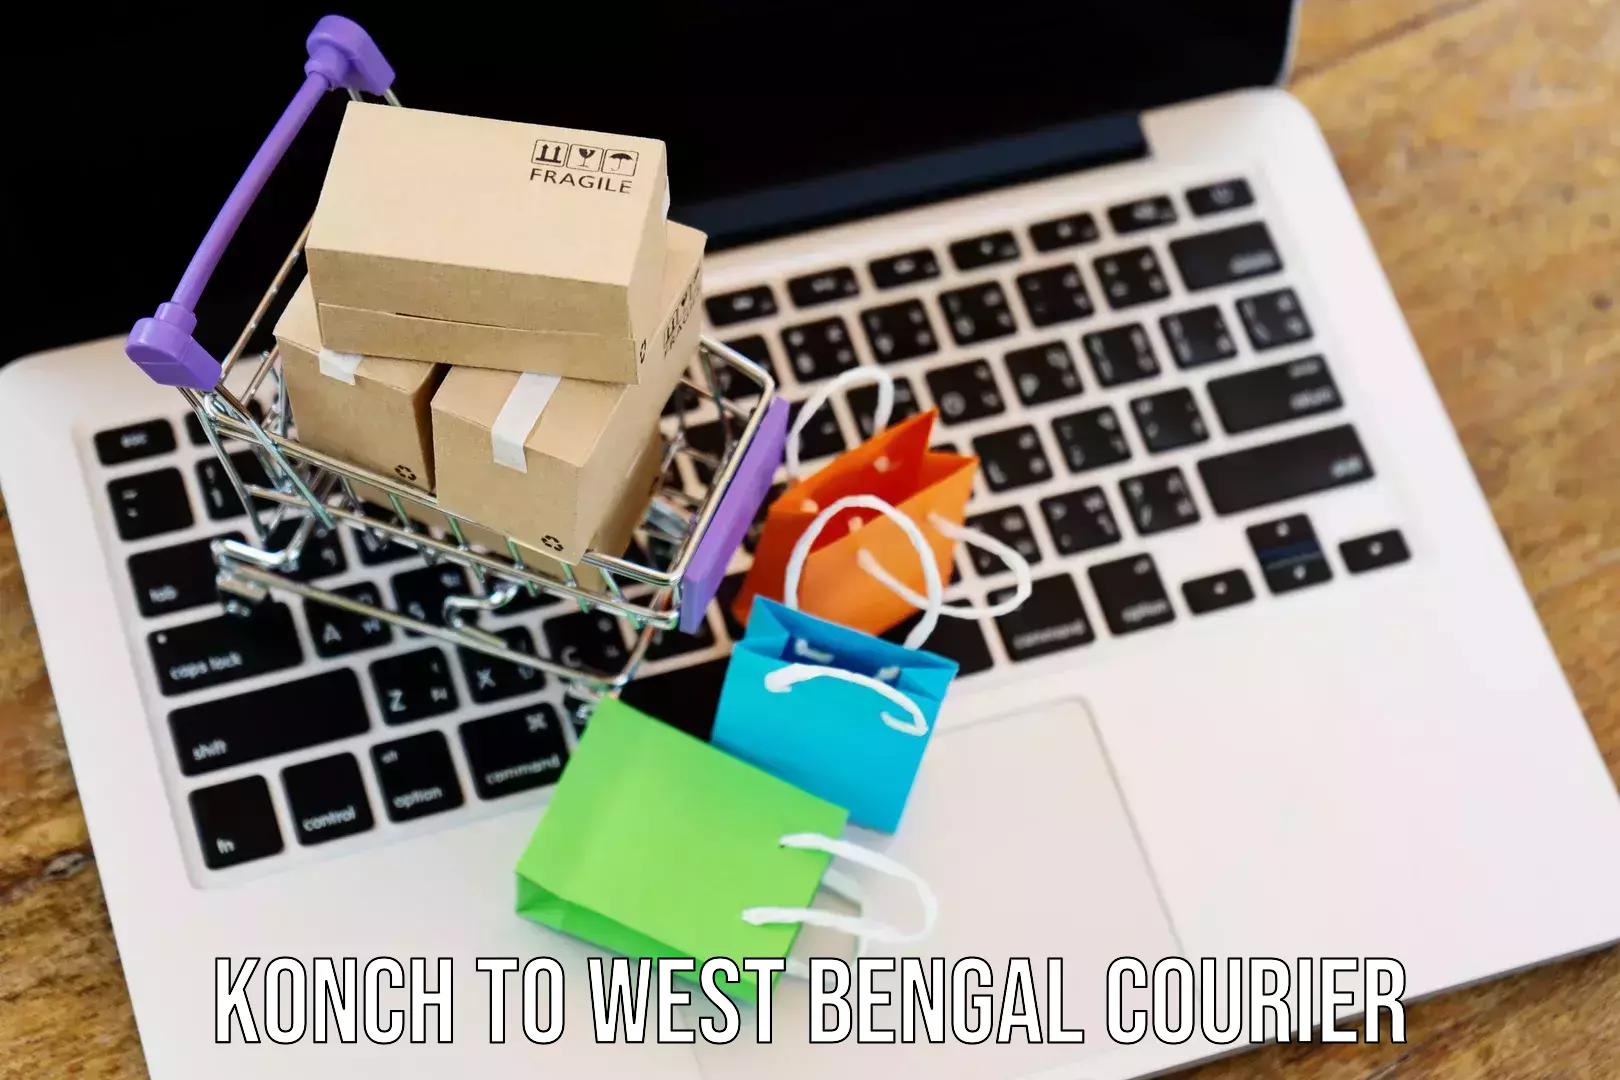 Secure packaging in Konch to West Bengal